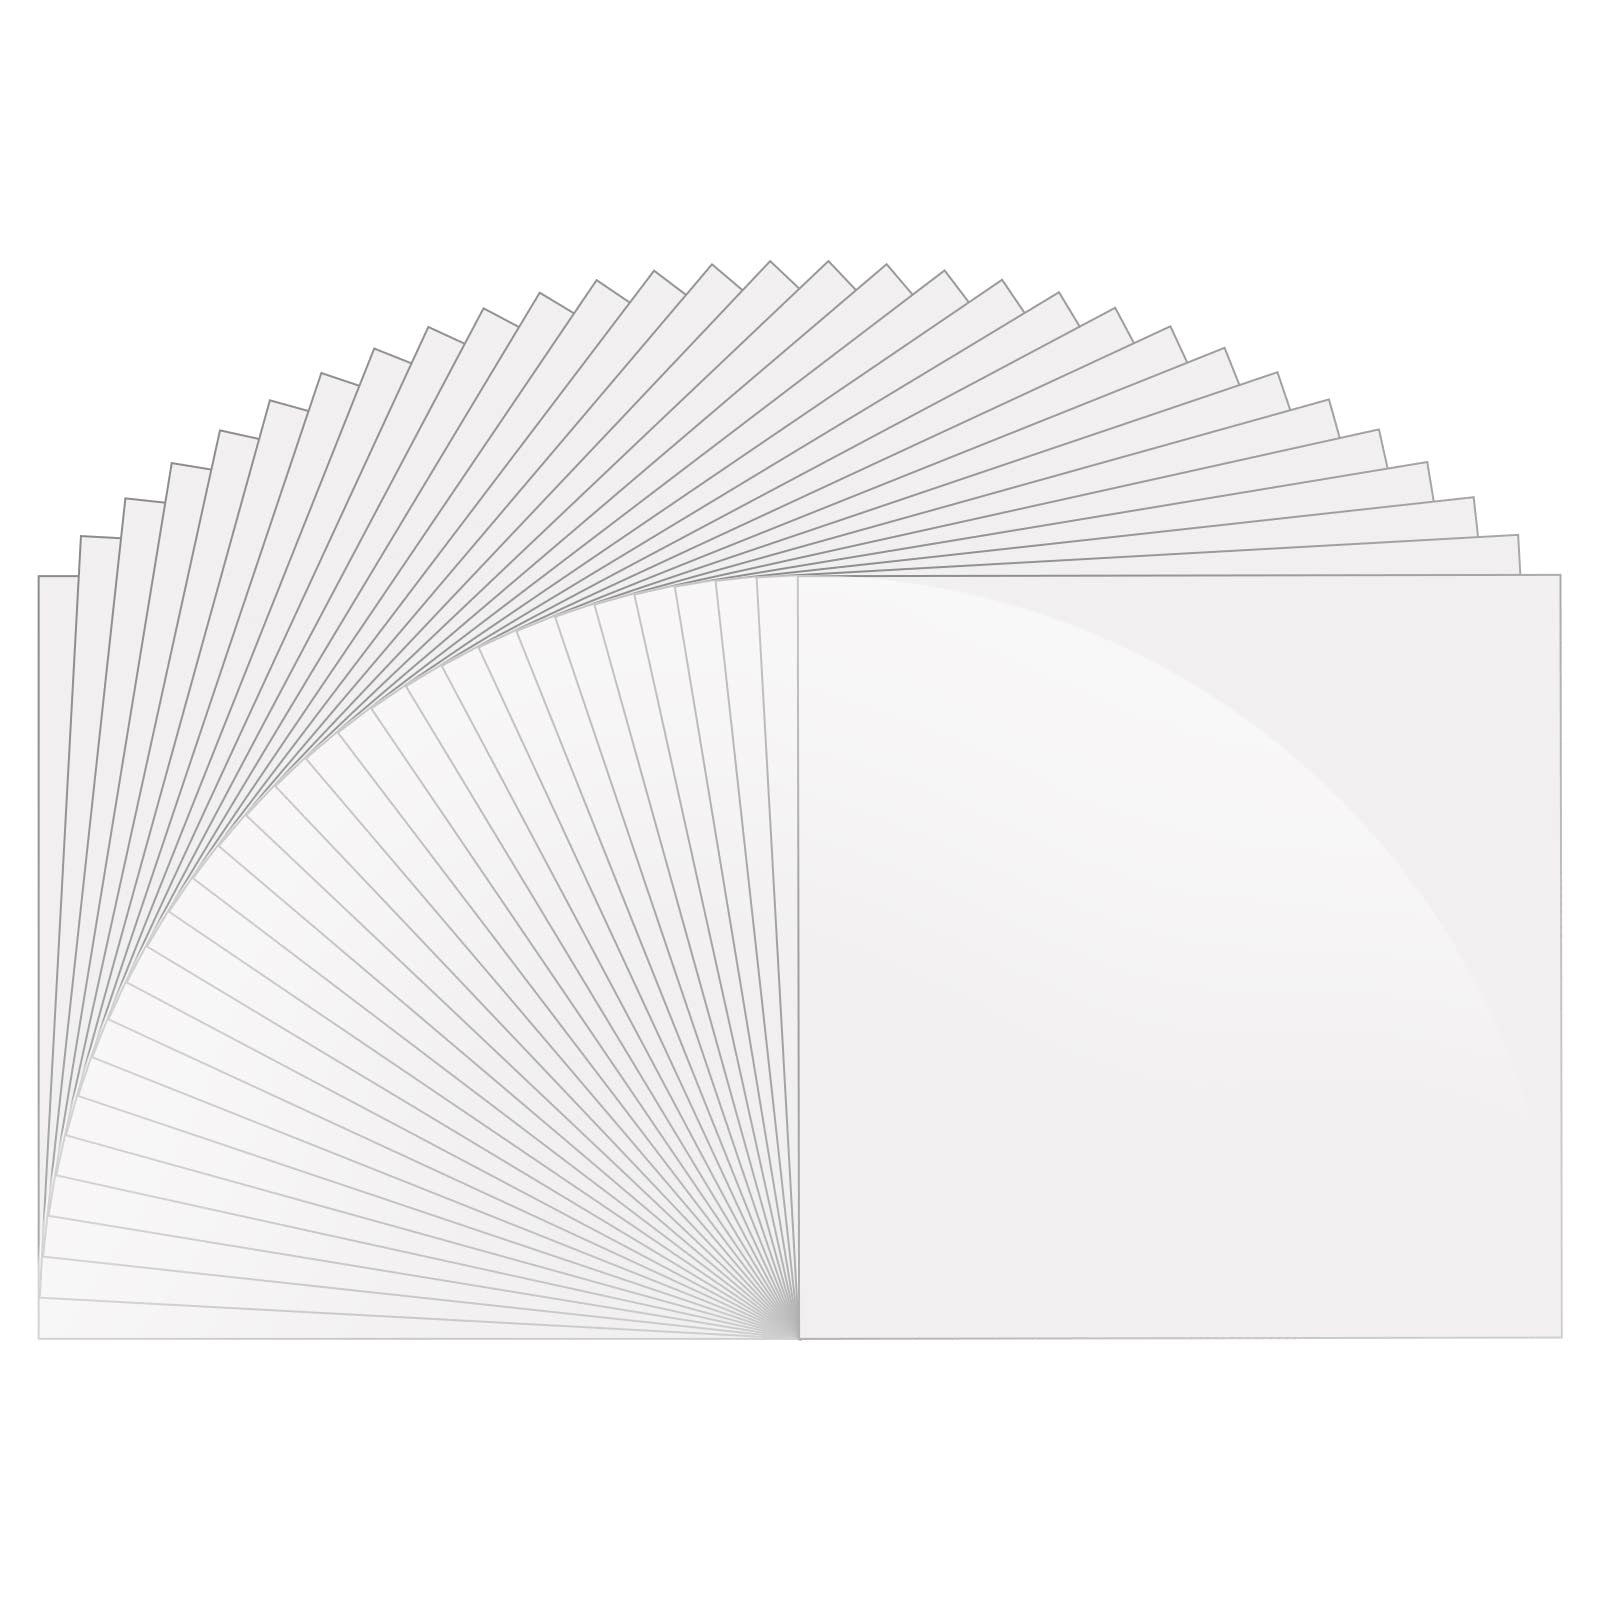 HUAXING Huaxing glossy White Permanent Vinyl for cricut, Adhesive